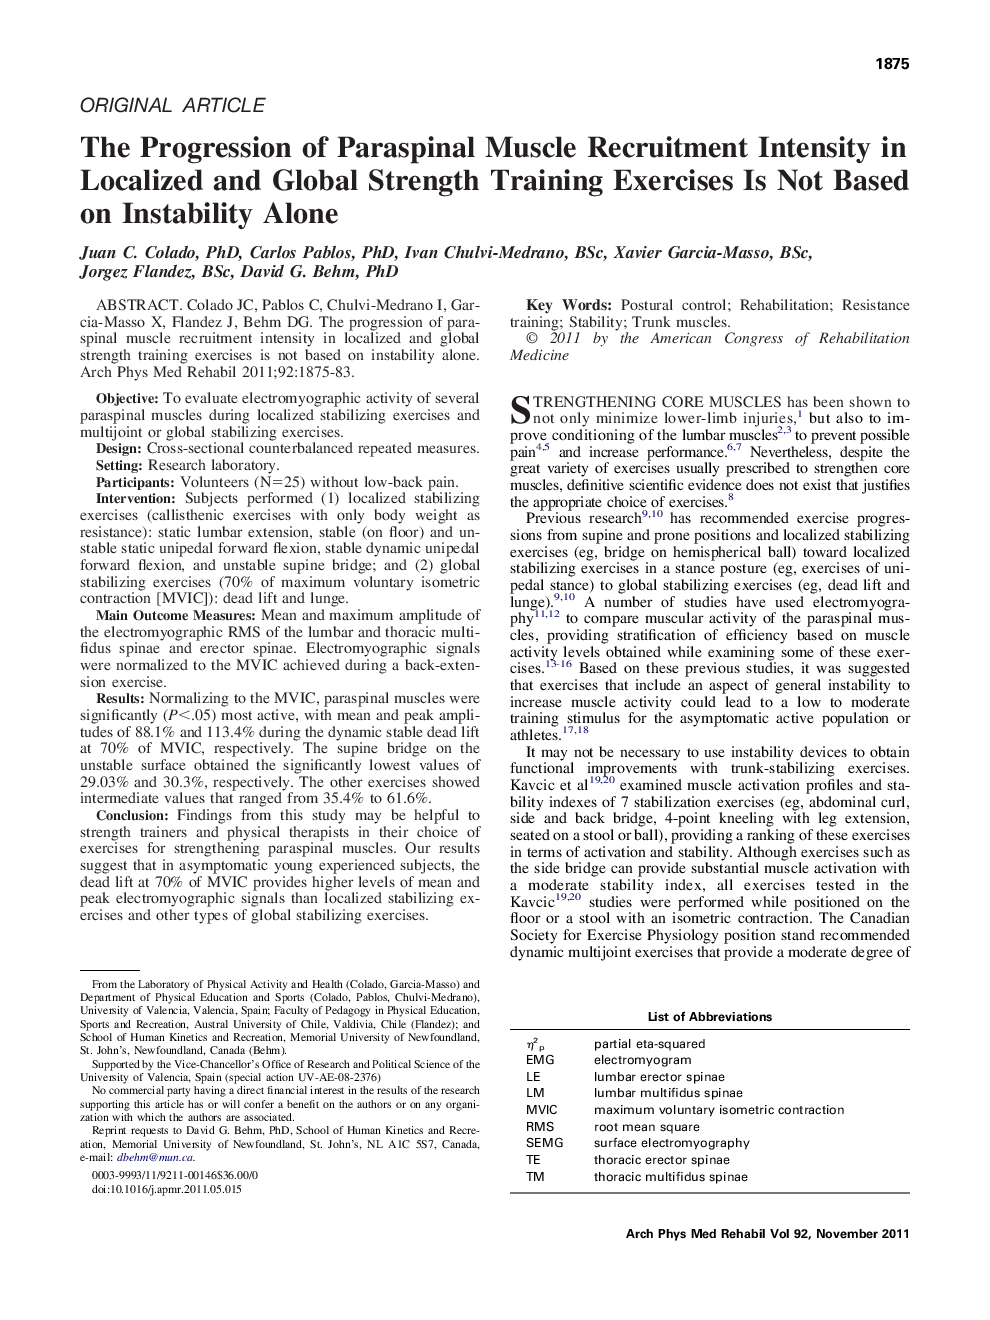 The Progression of Paraspinal Muscle Recruitment Intensity in Localized and Global Strength Training Exercises Is Not Based on Instability Alone 